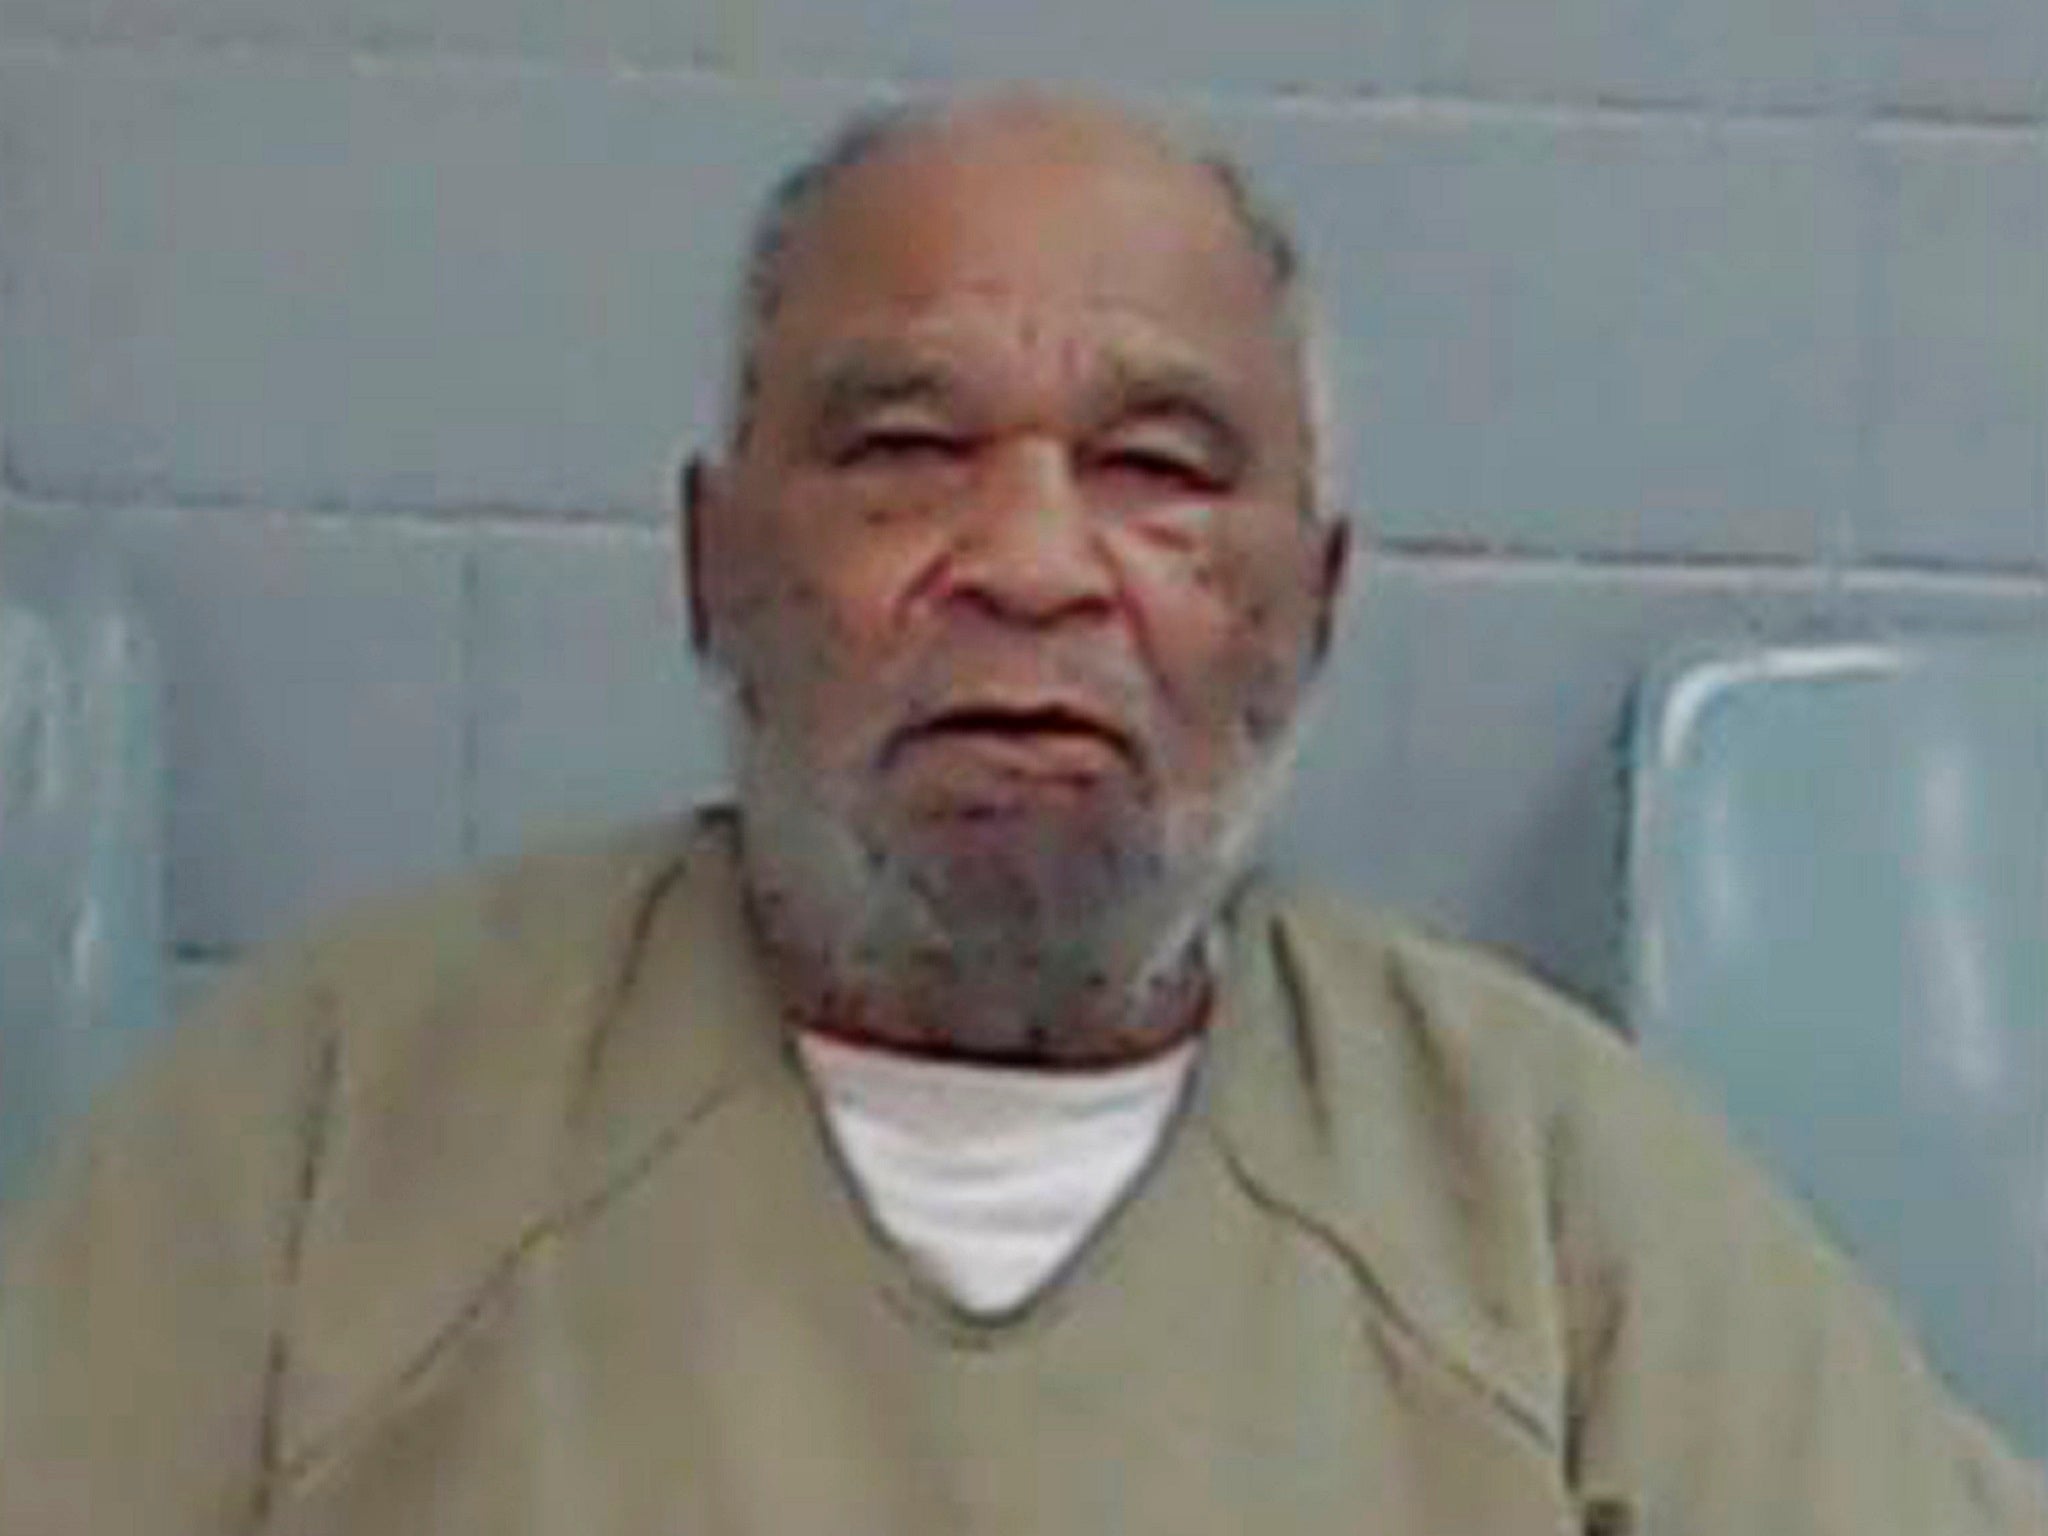 Samuel Little, serving a life sentence for three murders, now claims he was involved in the killings of as many as 90 people